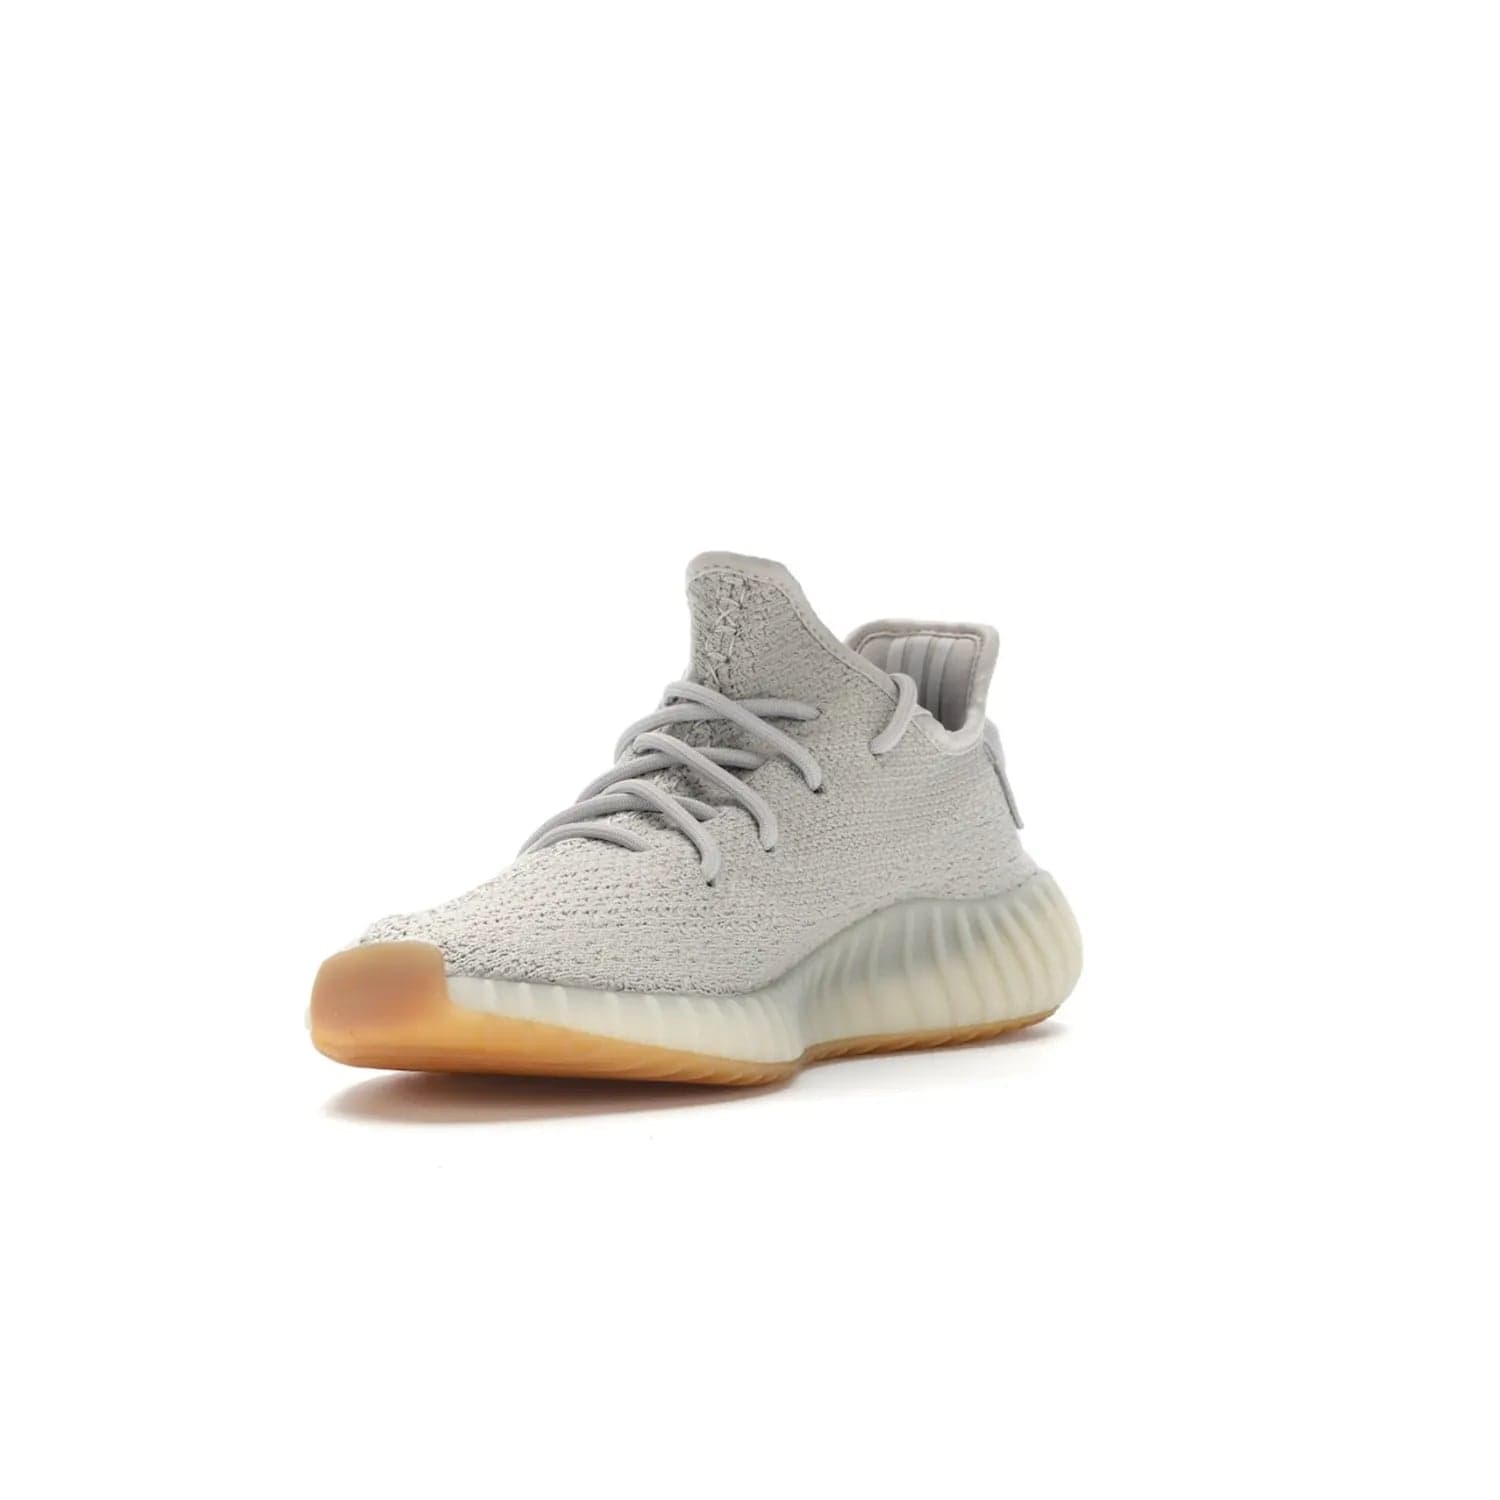 adidas Yeezy Boost 350 V2 Sesame - Image 14 - Only at www.BallersClubKickz.com - Introducing the adidas Yeezy Boost 350 V2 Sesame. Featuring a sesame upper, midsole and gum sole for a sleek silhouette. Cop the stylish sneaker released in November 2018.